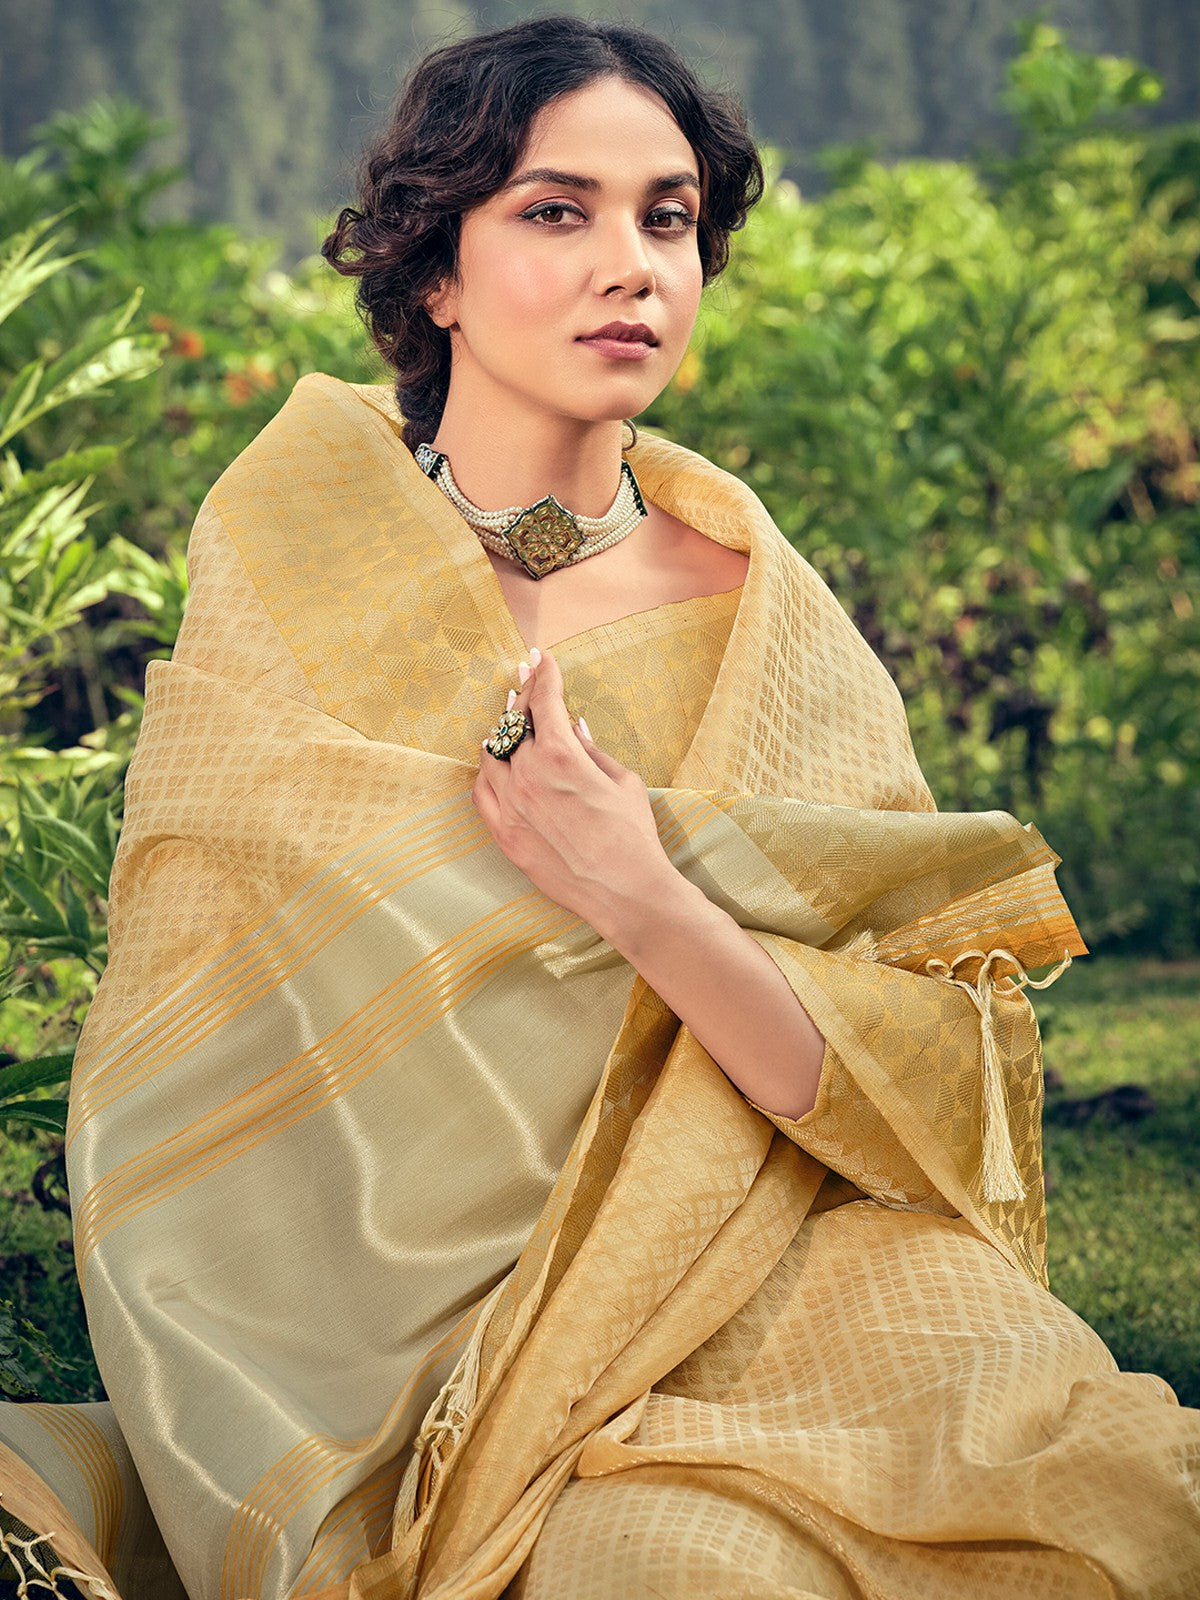 Odette Yellow Linen Tissue Saree for Women With Unstitched Blouse